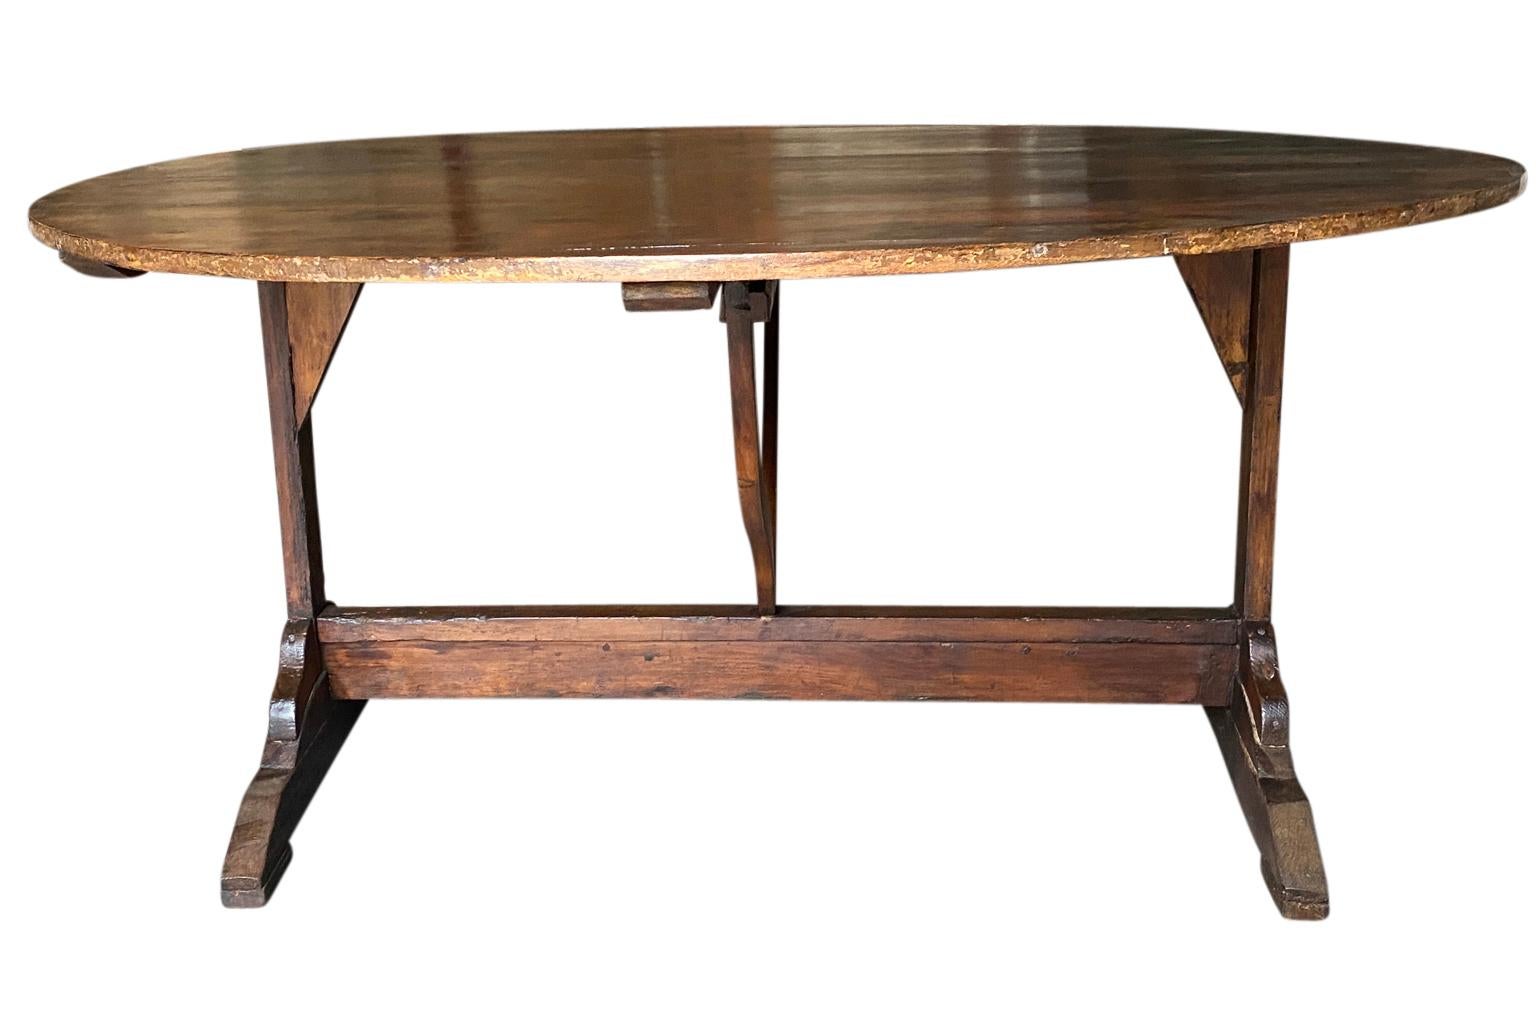 A very grand scale table Vigneron - wine tasting table from the South of France. Beautifully constructed from chestnut and pine in an oval shape and tilting top. Terrific as a breakfast table or smaller dining table. Great patina.